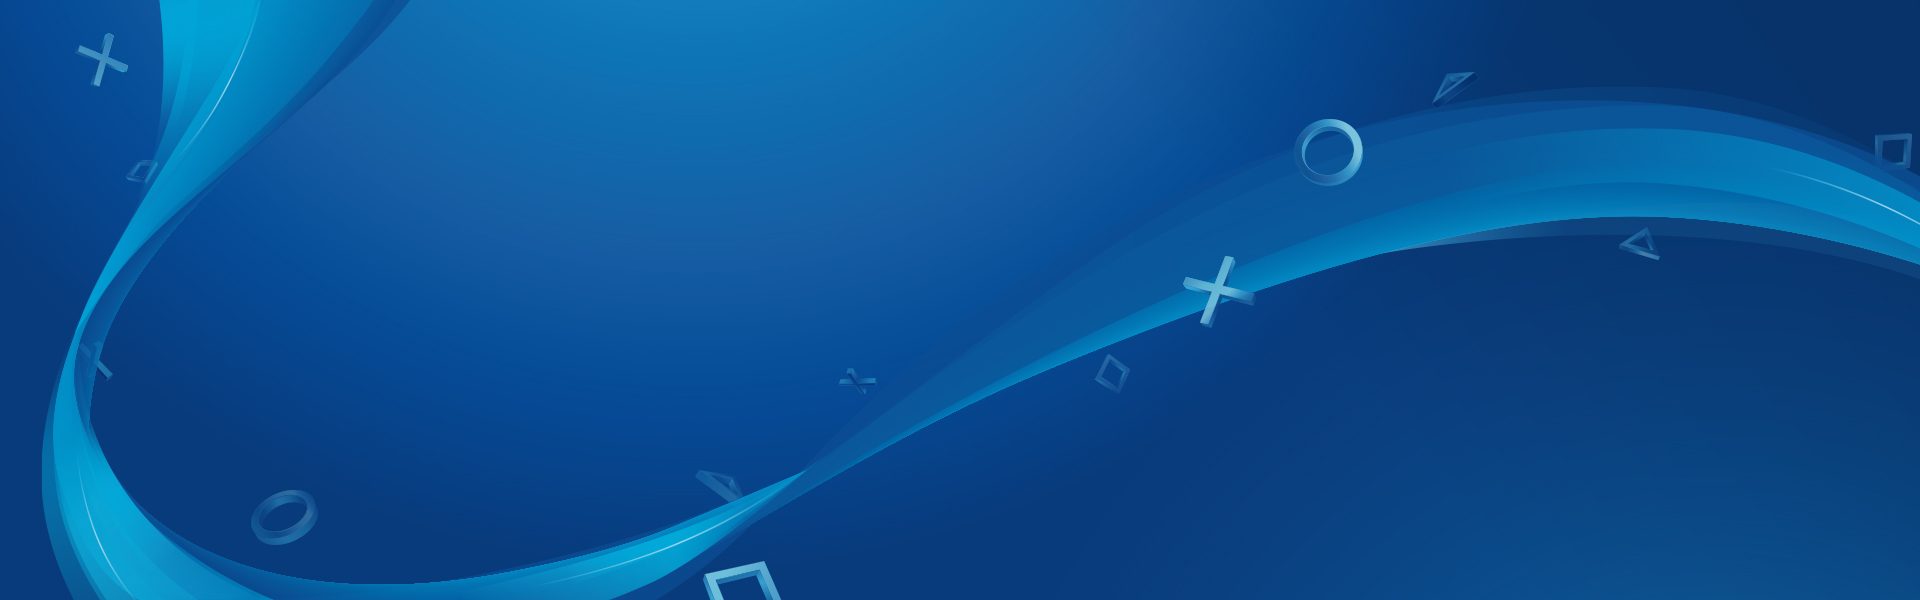 psn for pc